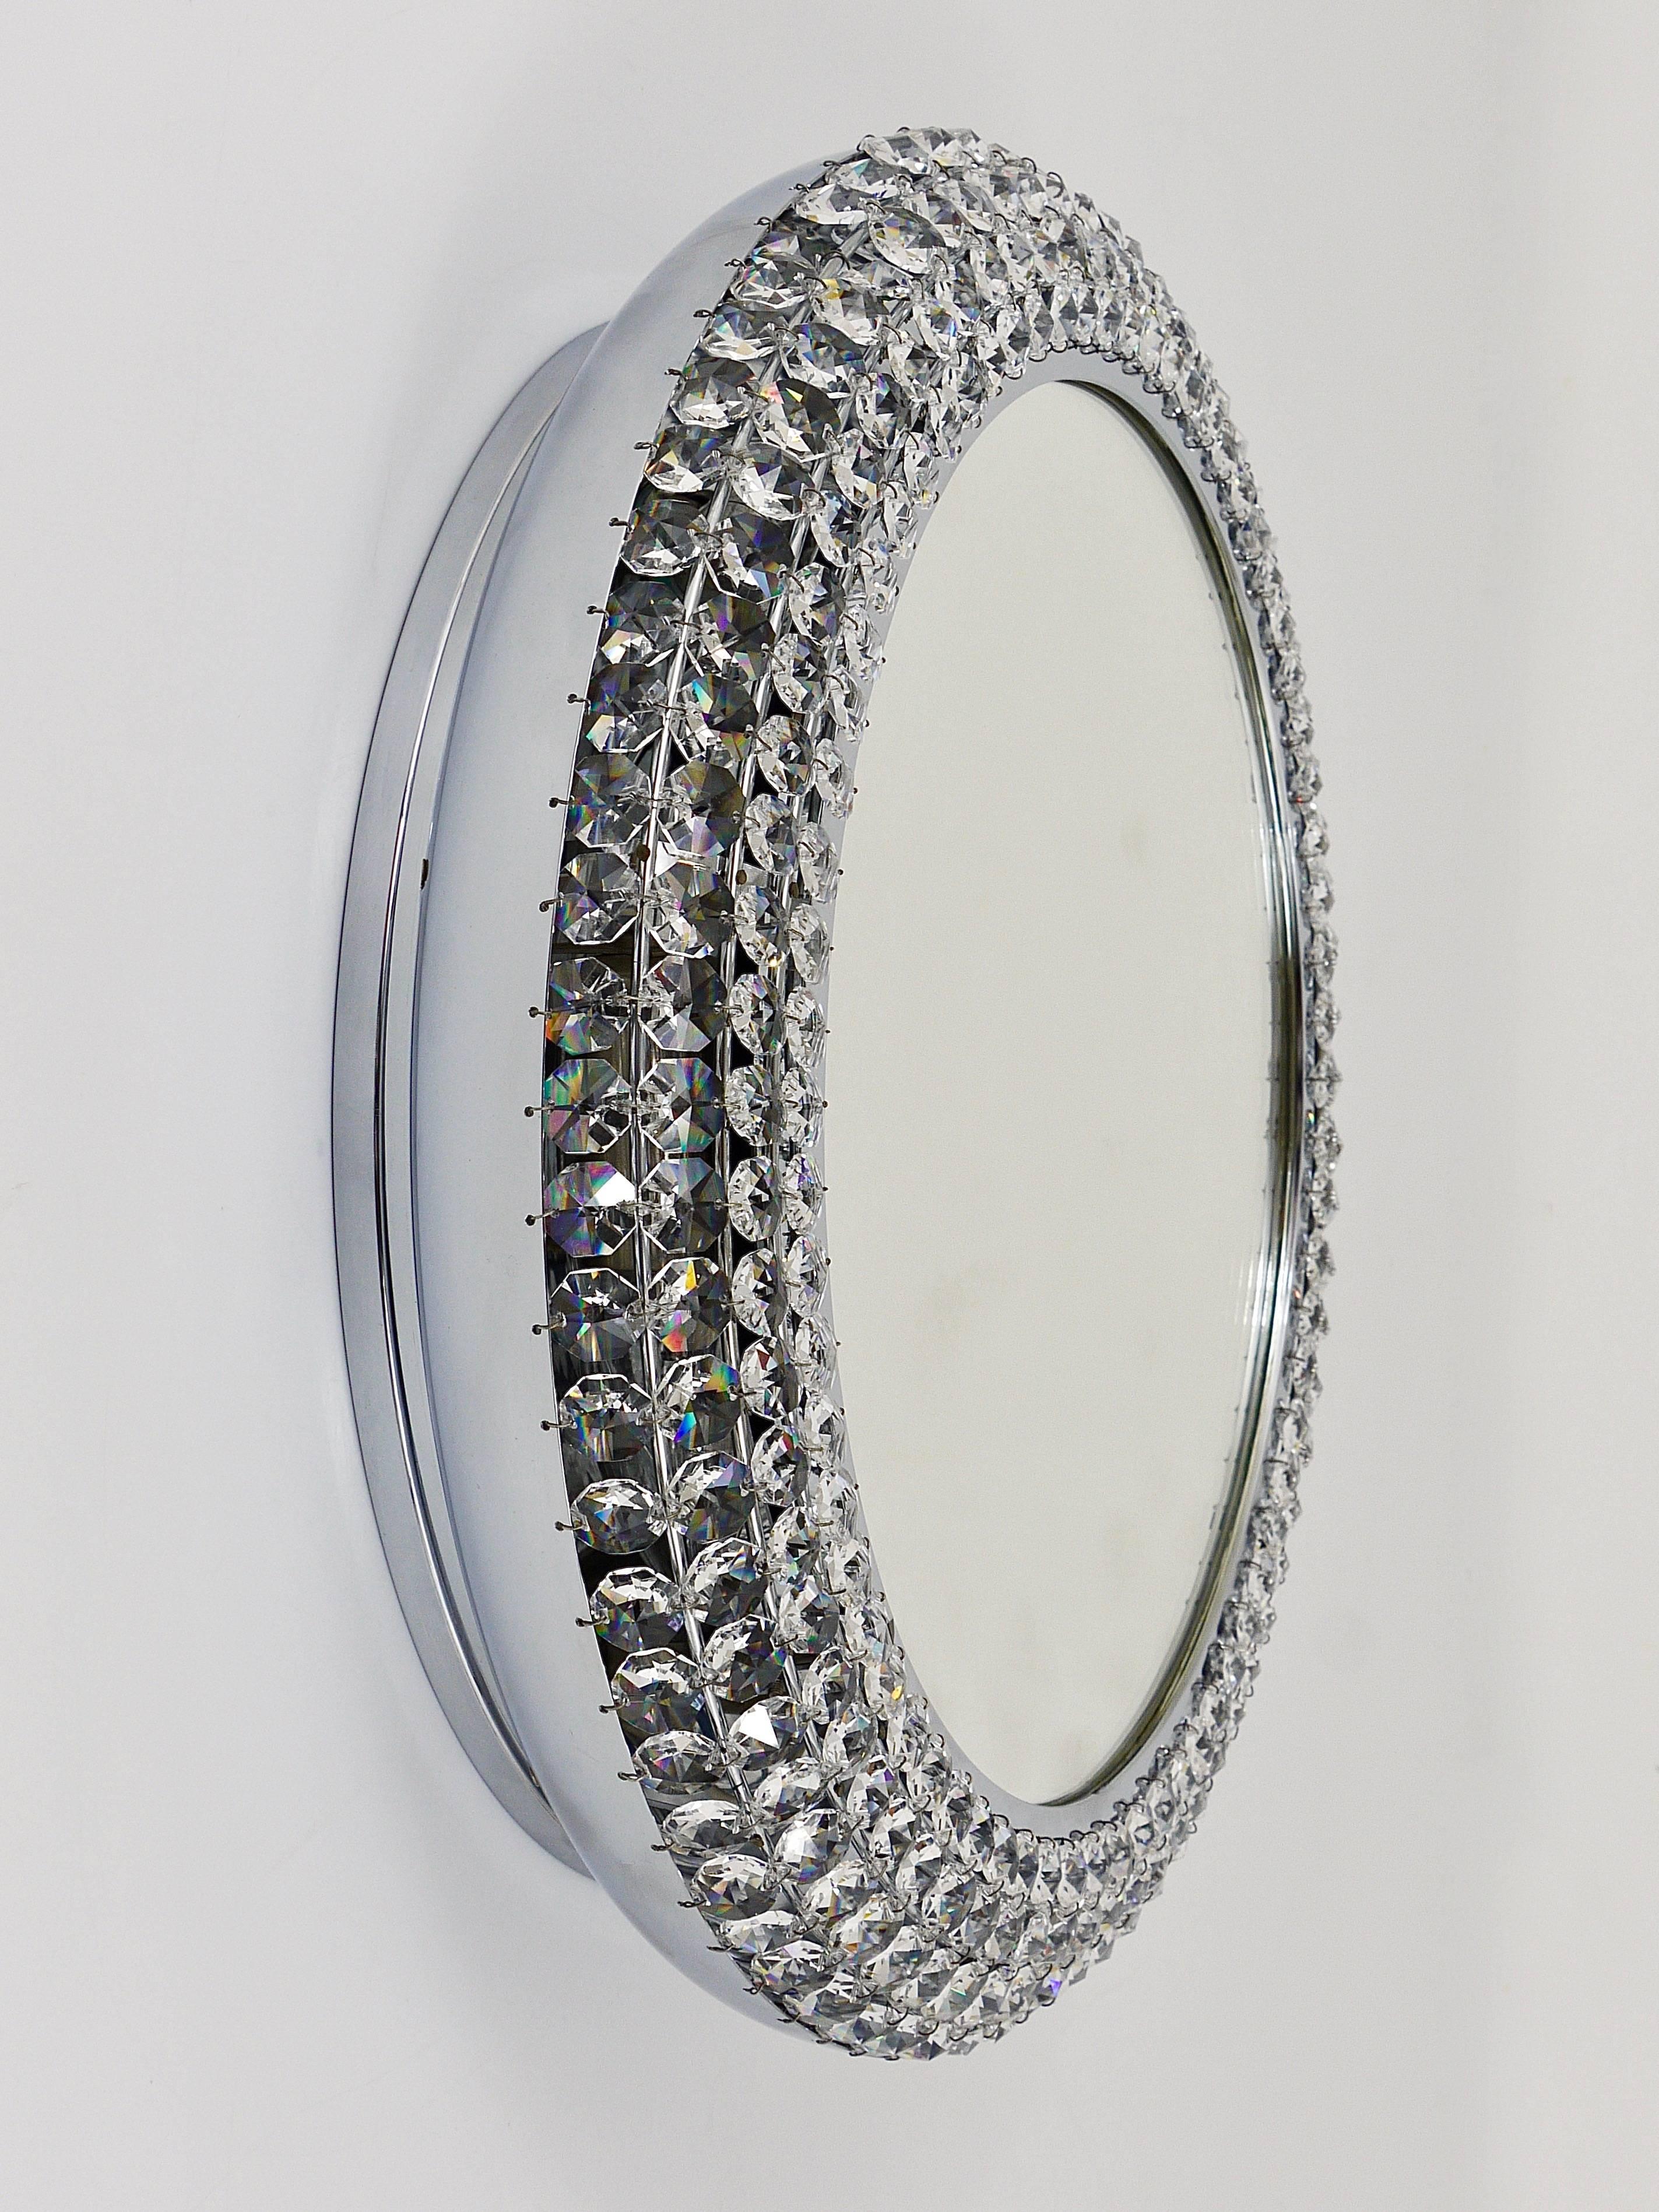 20th Century Round Chromed Crystal Backlit Wall Mirror, Austria, 1960s For Sale